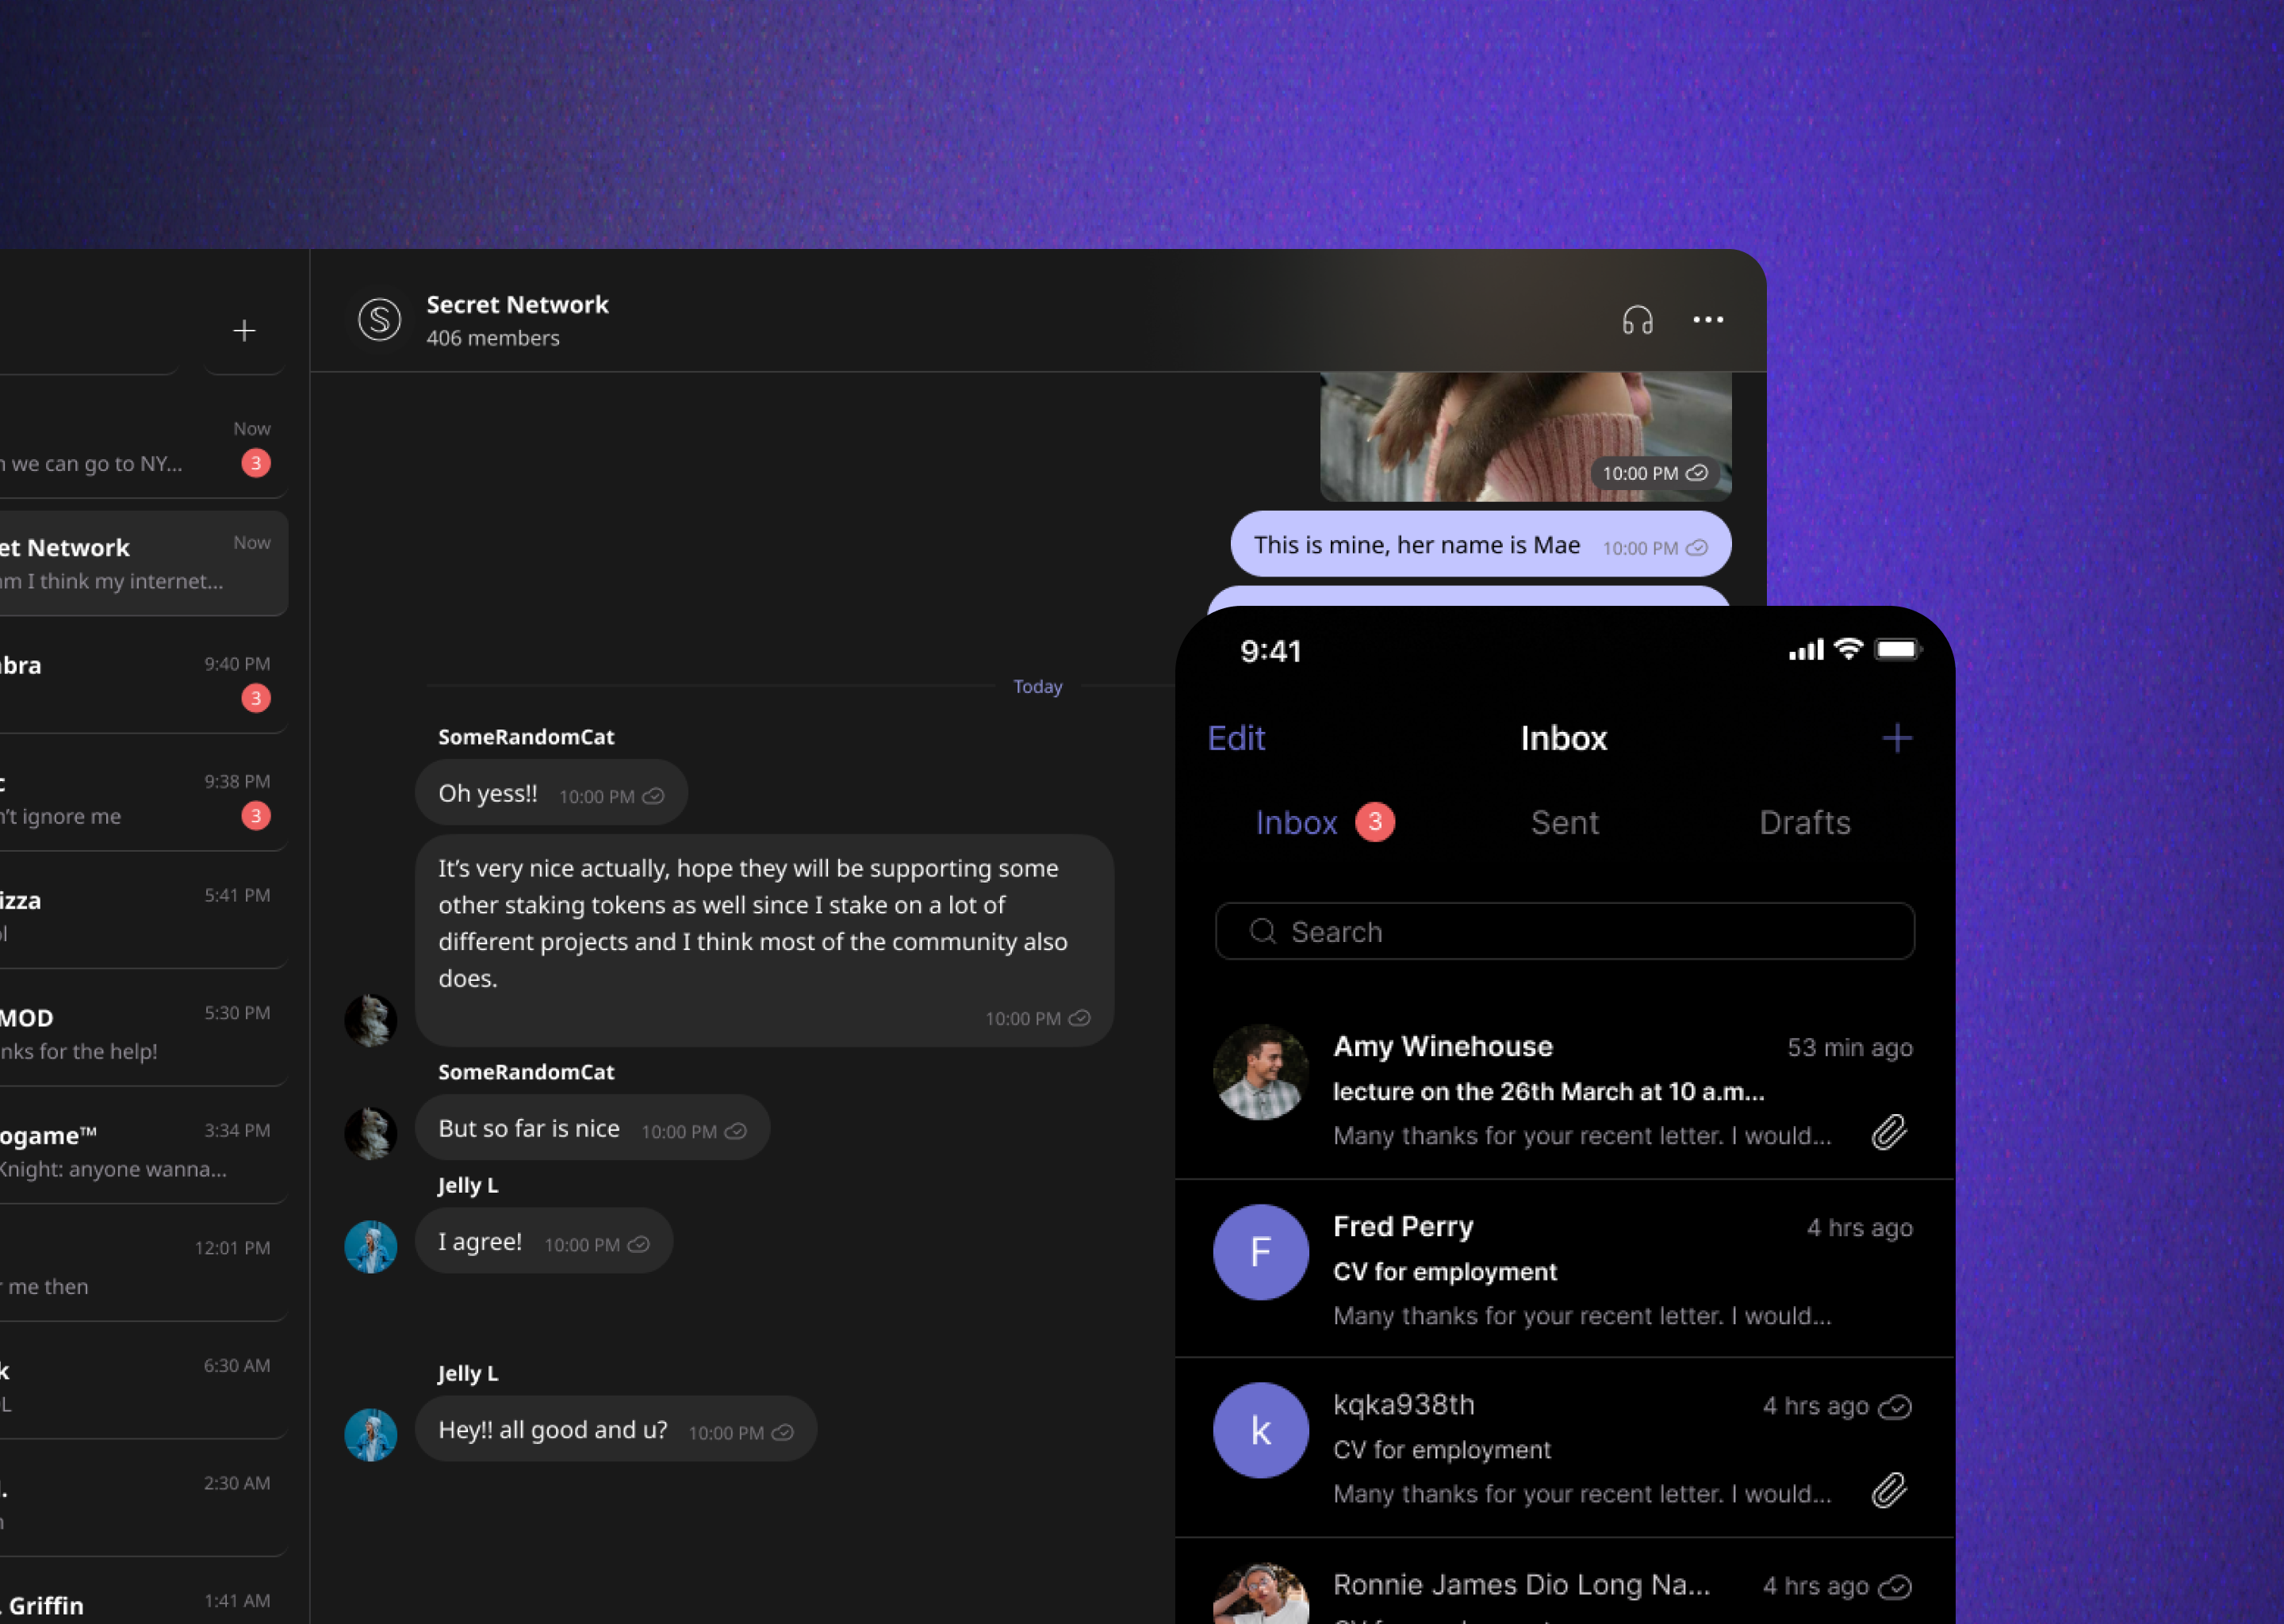 Altermail Chats in Mobile and Desktop apps